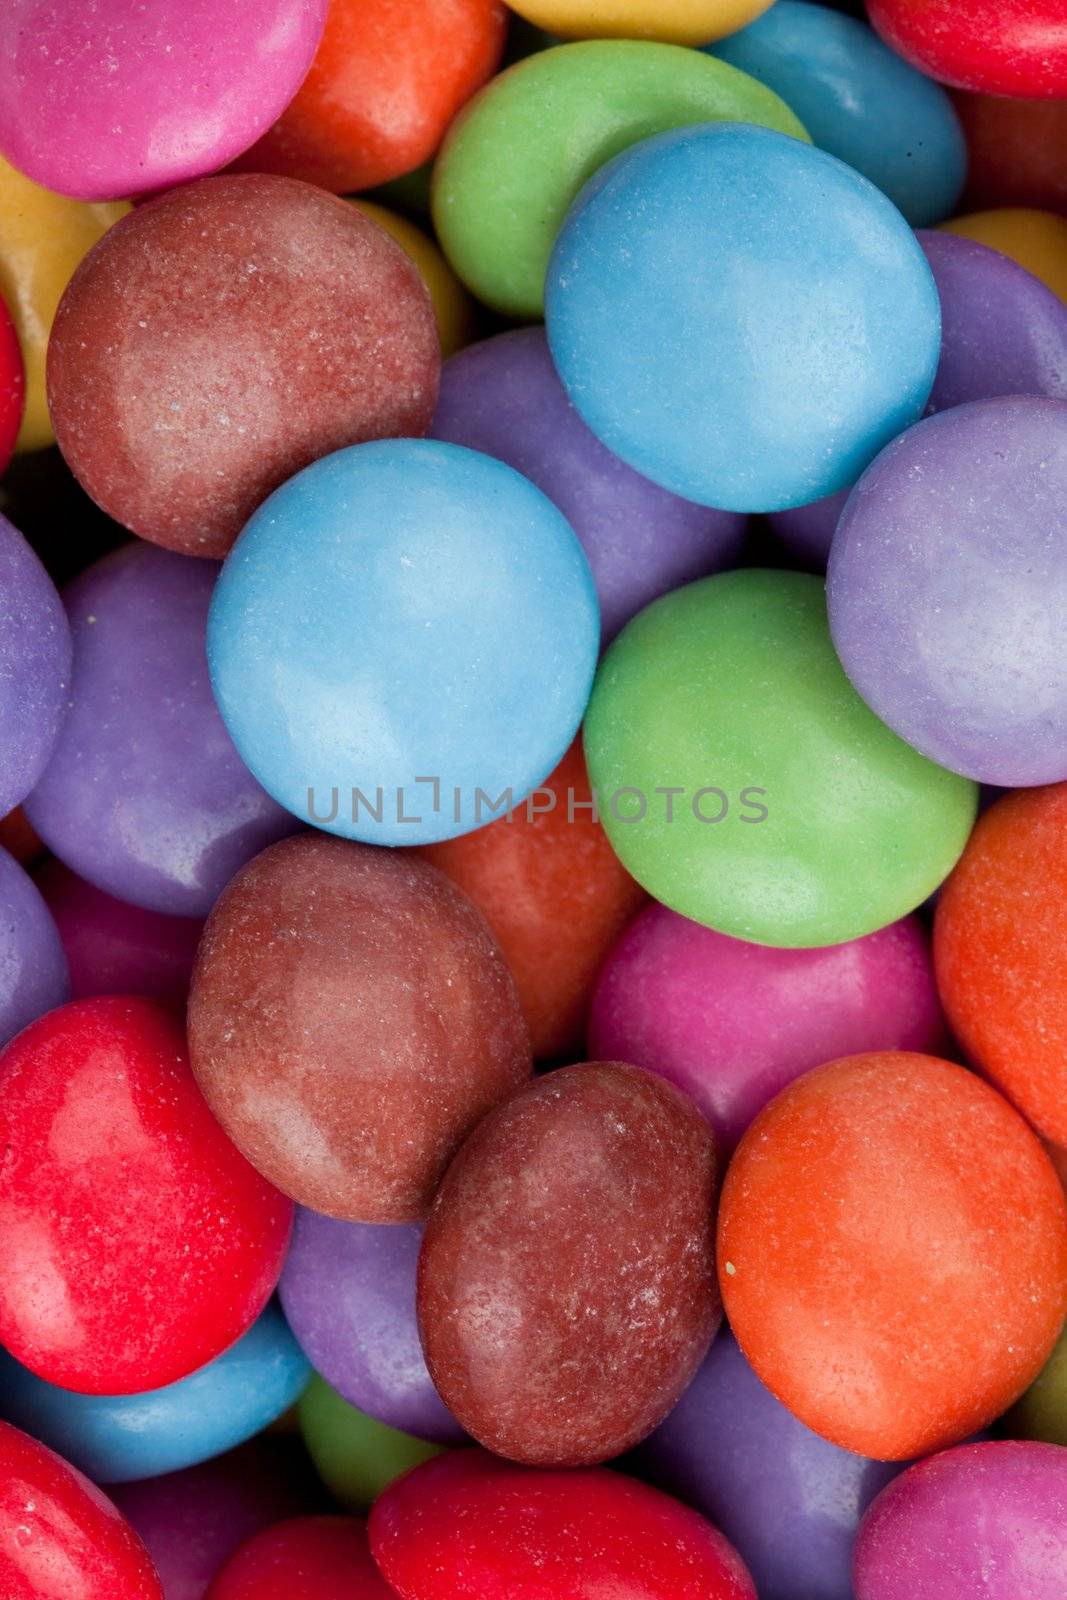 Candies in close-up